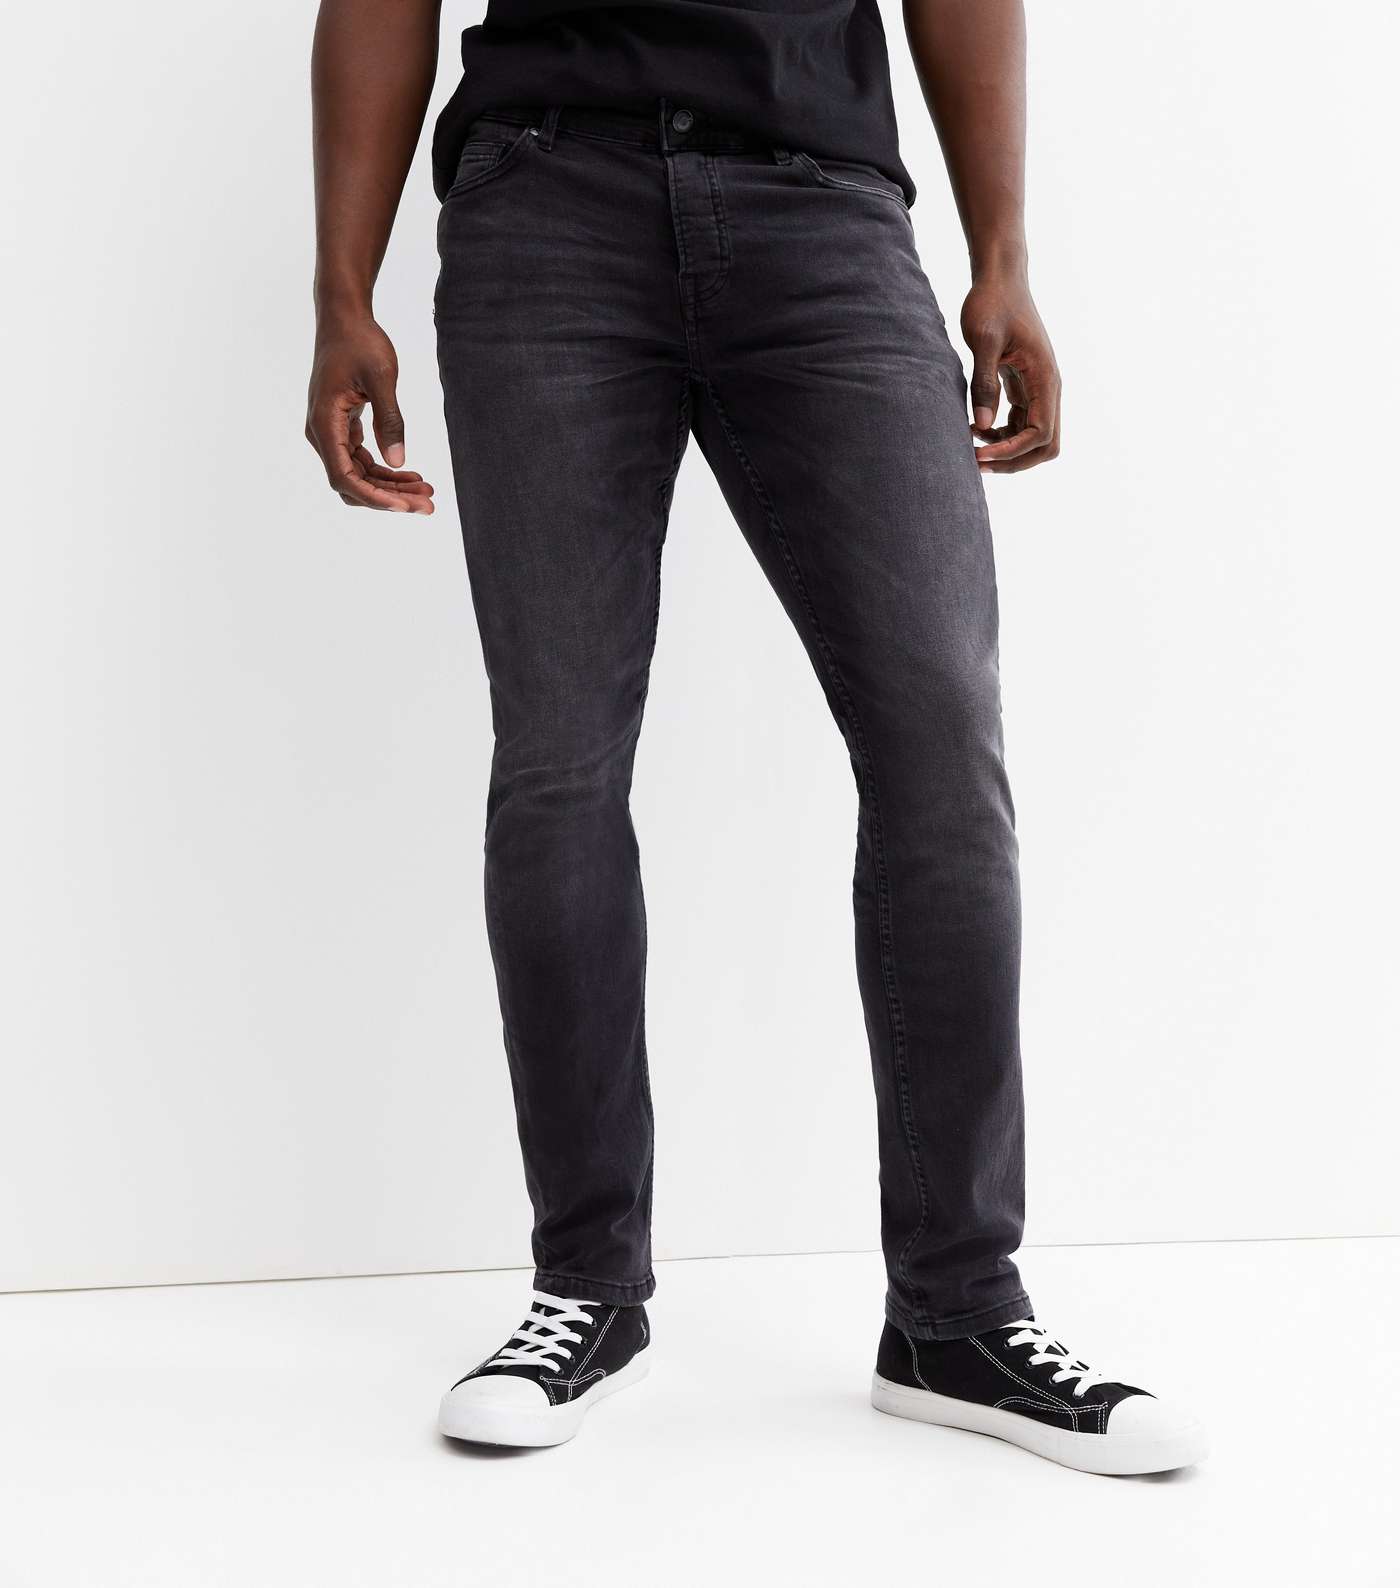 Only & Sons Black Slim Fit Tapered Jeans Image 2